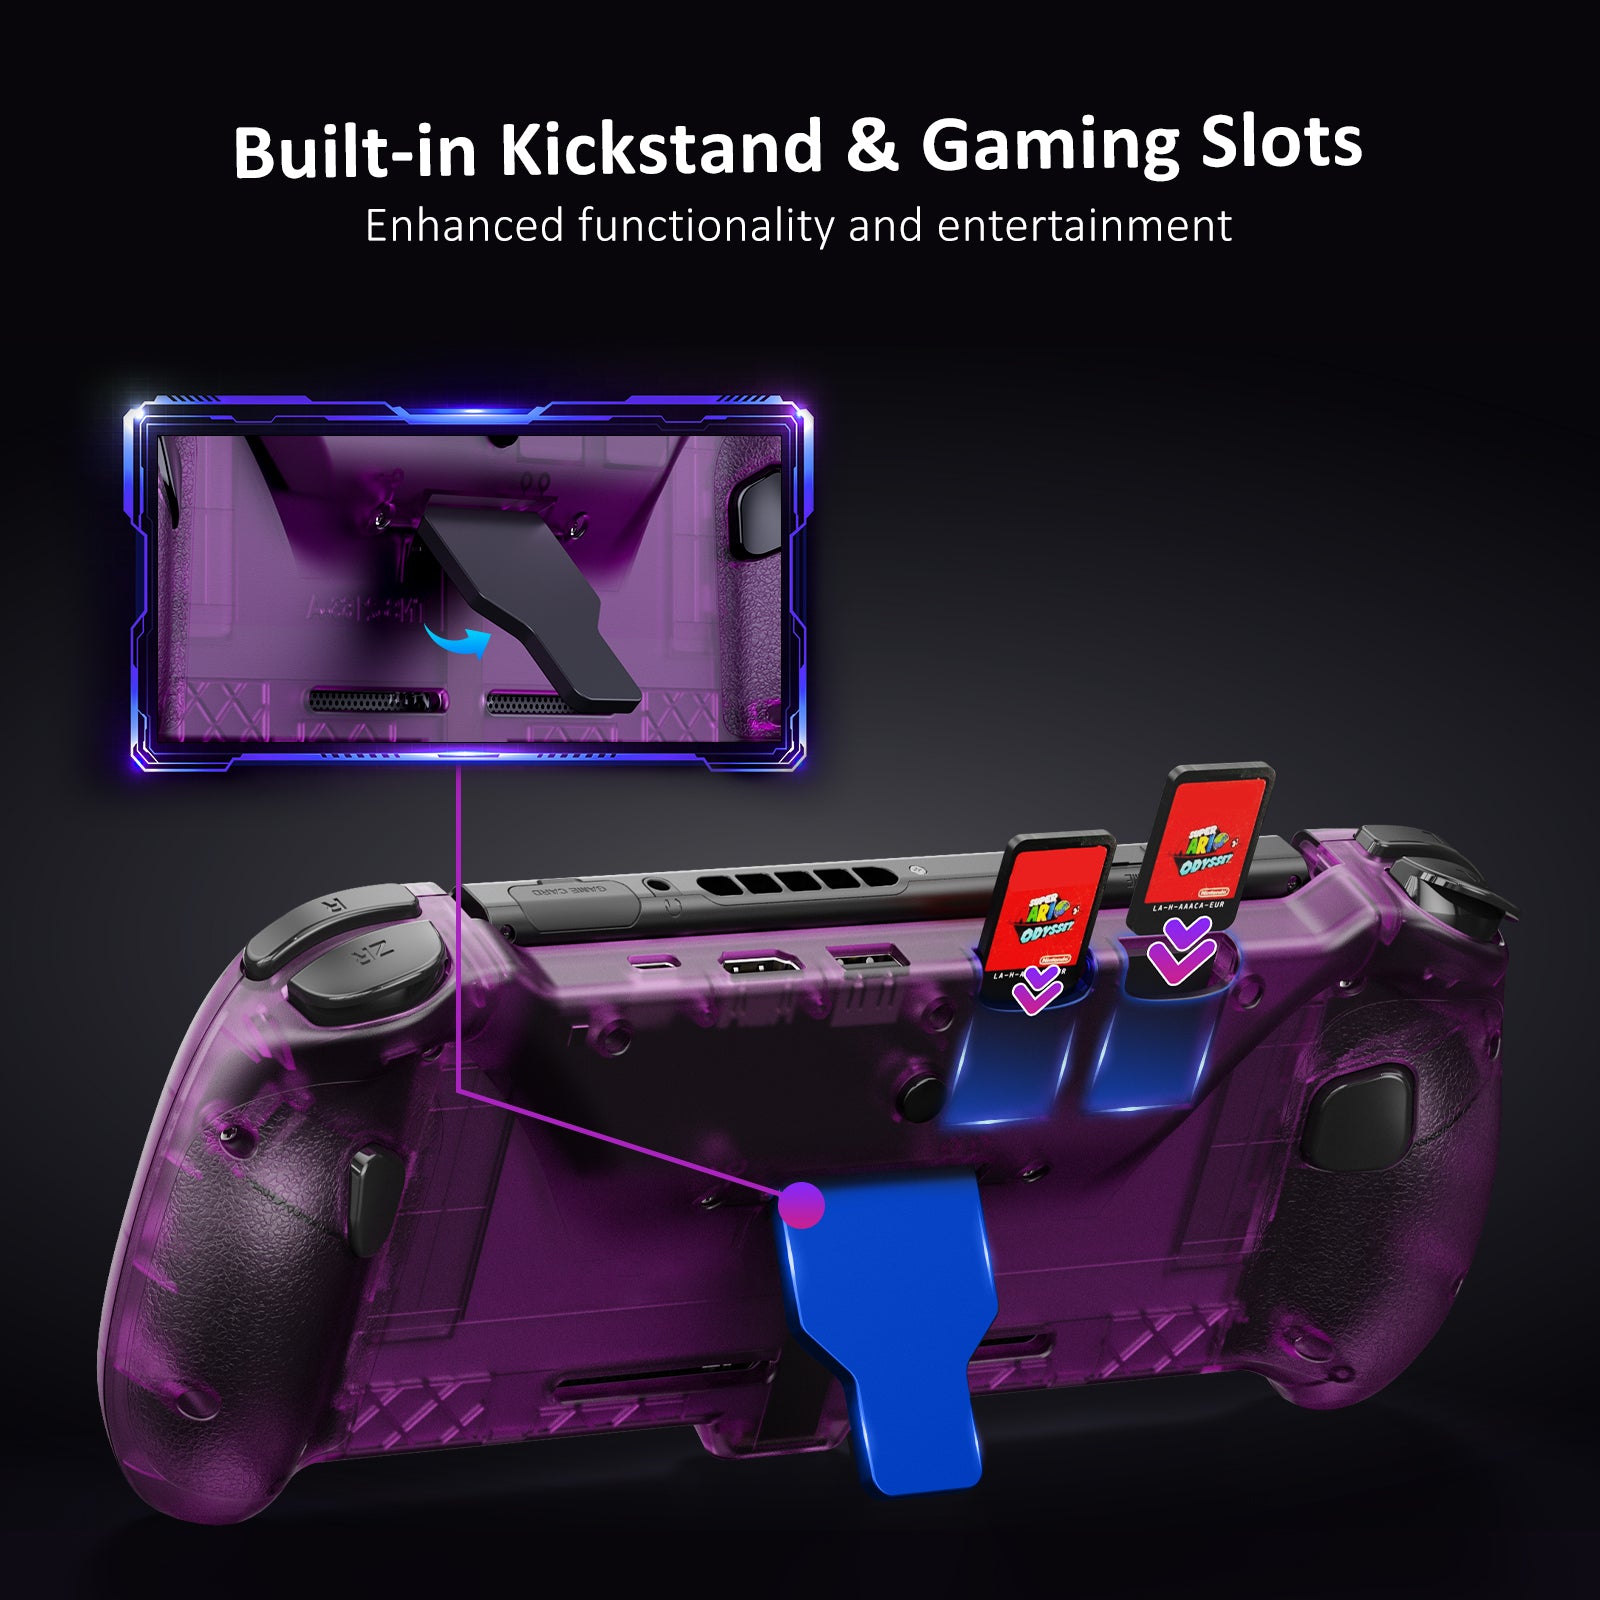 The controller includes a kickstand and a game card slot.